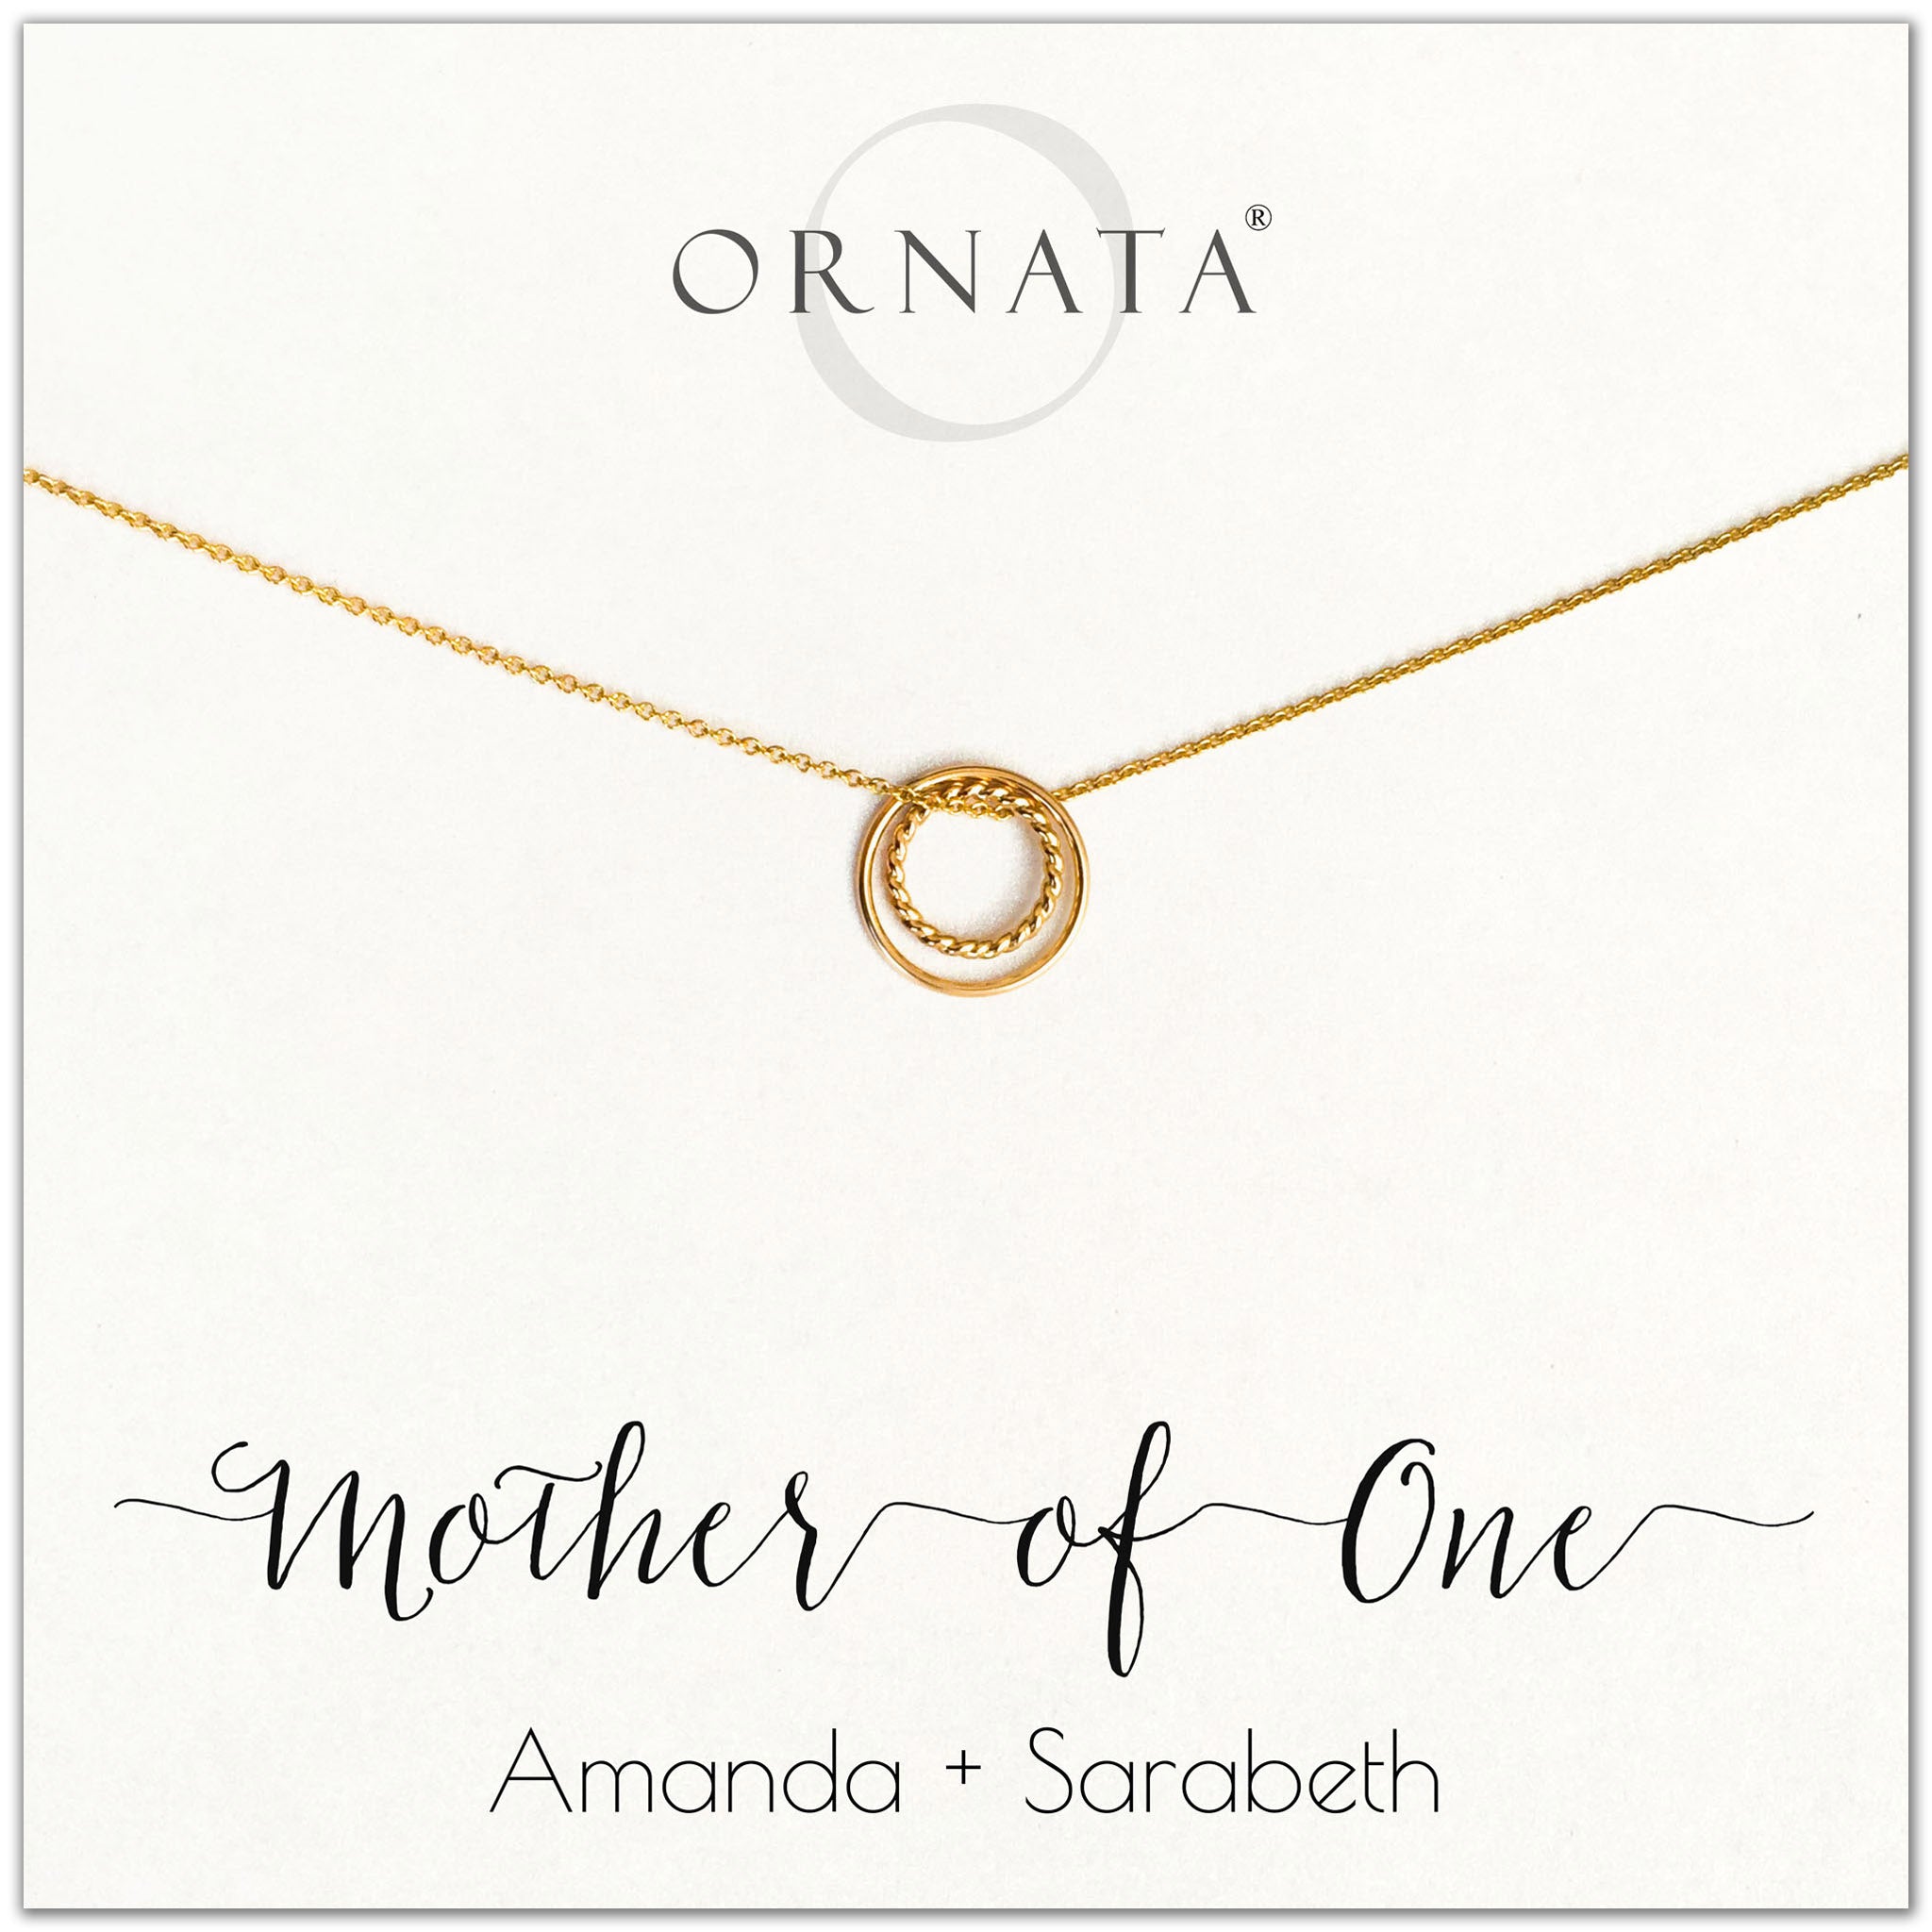 Mom or Mother of One - personalized gold necklaces. Our 14 karat gold filled custom jewelry is a perfect gift for mothers of one child, daughters, granddaughters, grandmothers, sisters, best friends, wives, girlfriends, and family members. Also a good gift for Mother’s Day. 